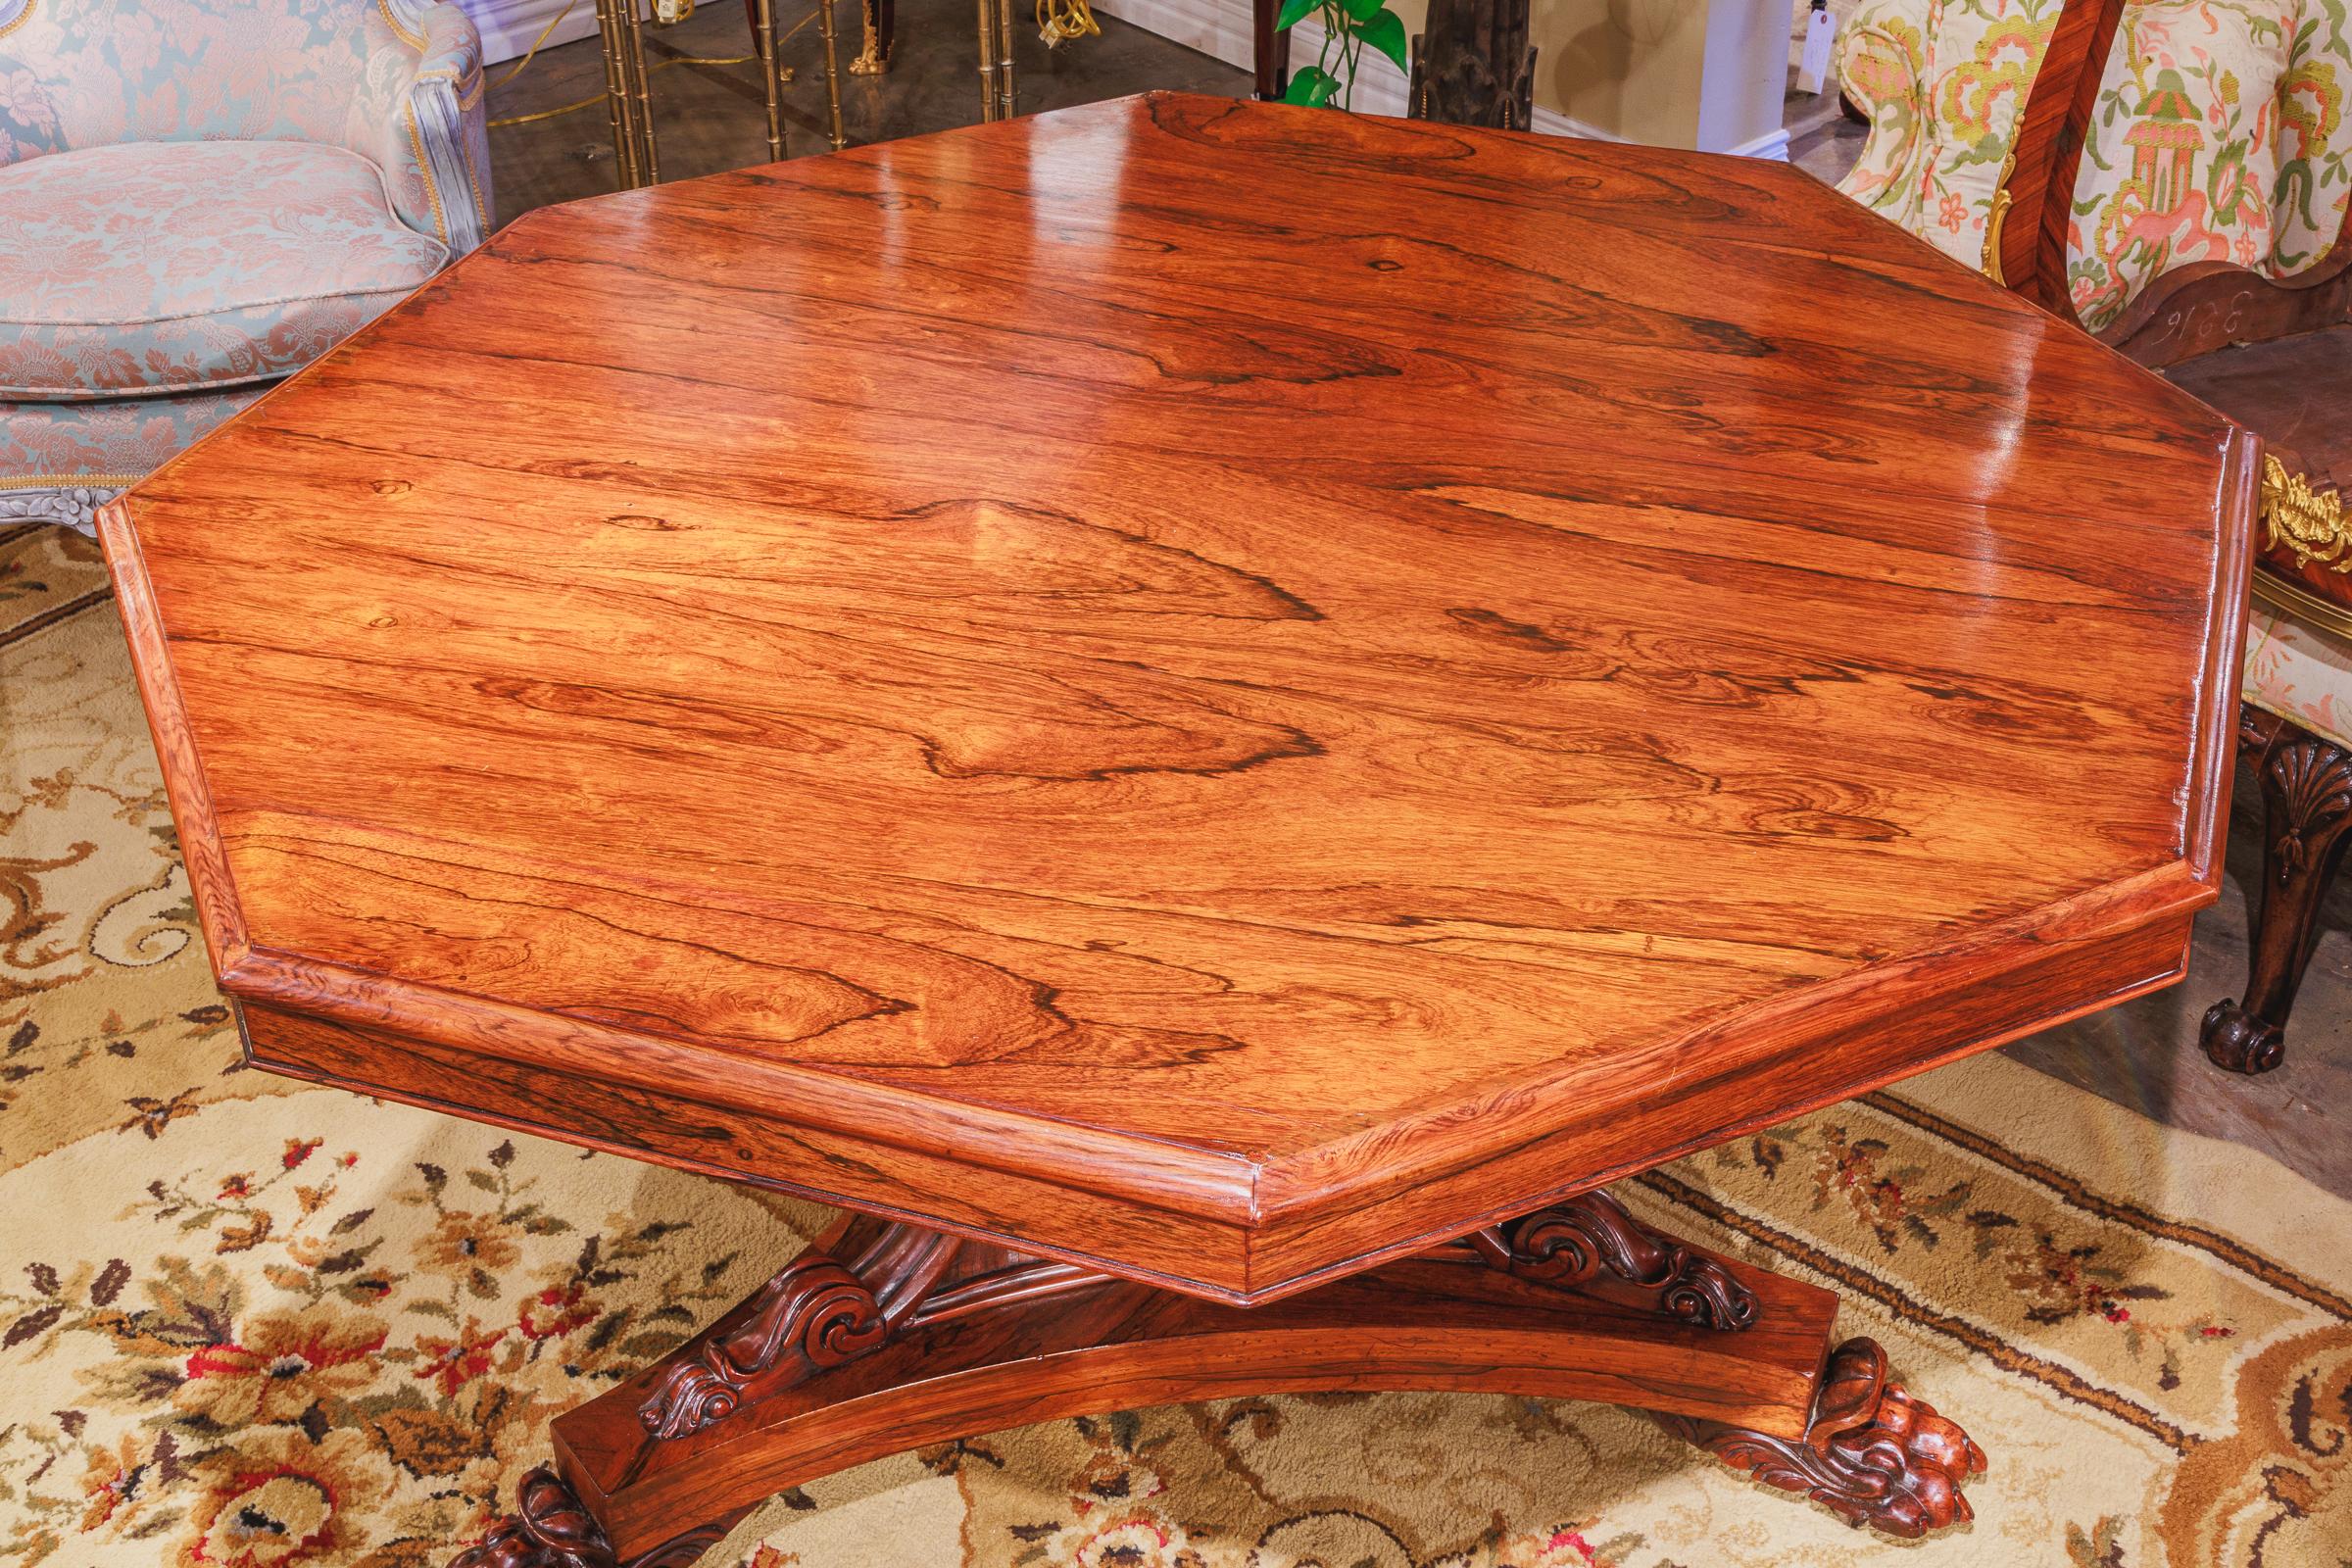 Fine Regency Period Octagonal Rosewood Center Table with a Pawed Foot Pedestal In Good Condition For Sale In Dallas, TX